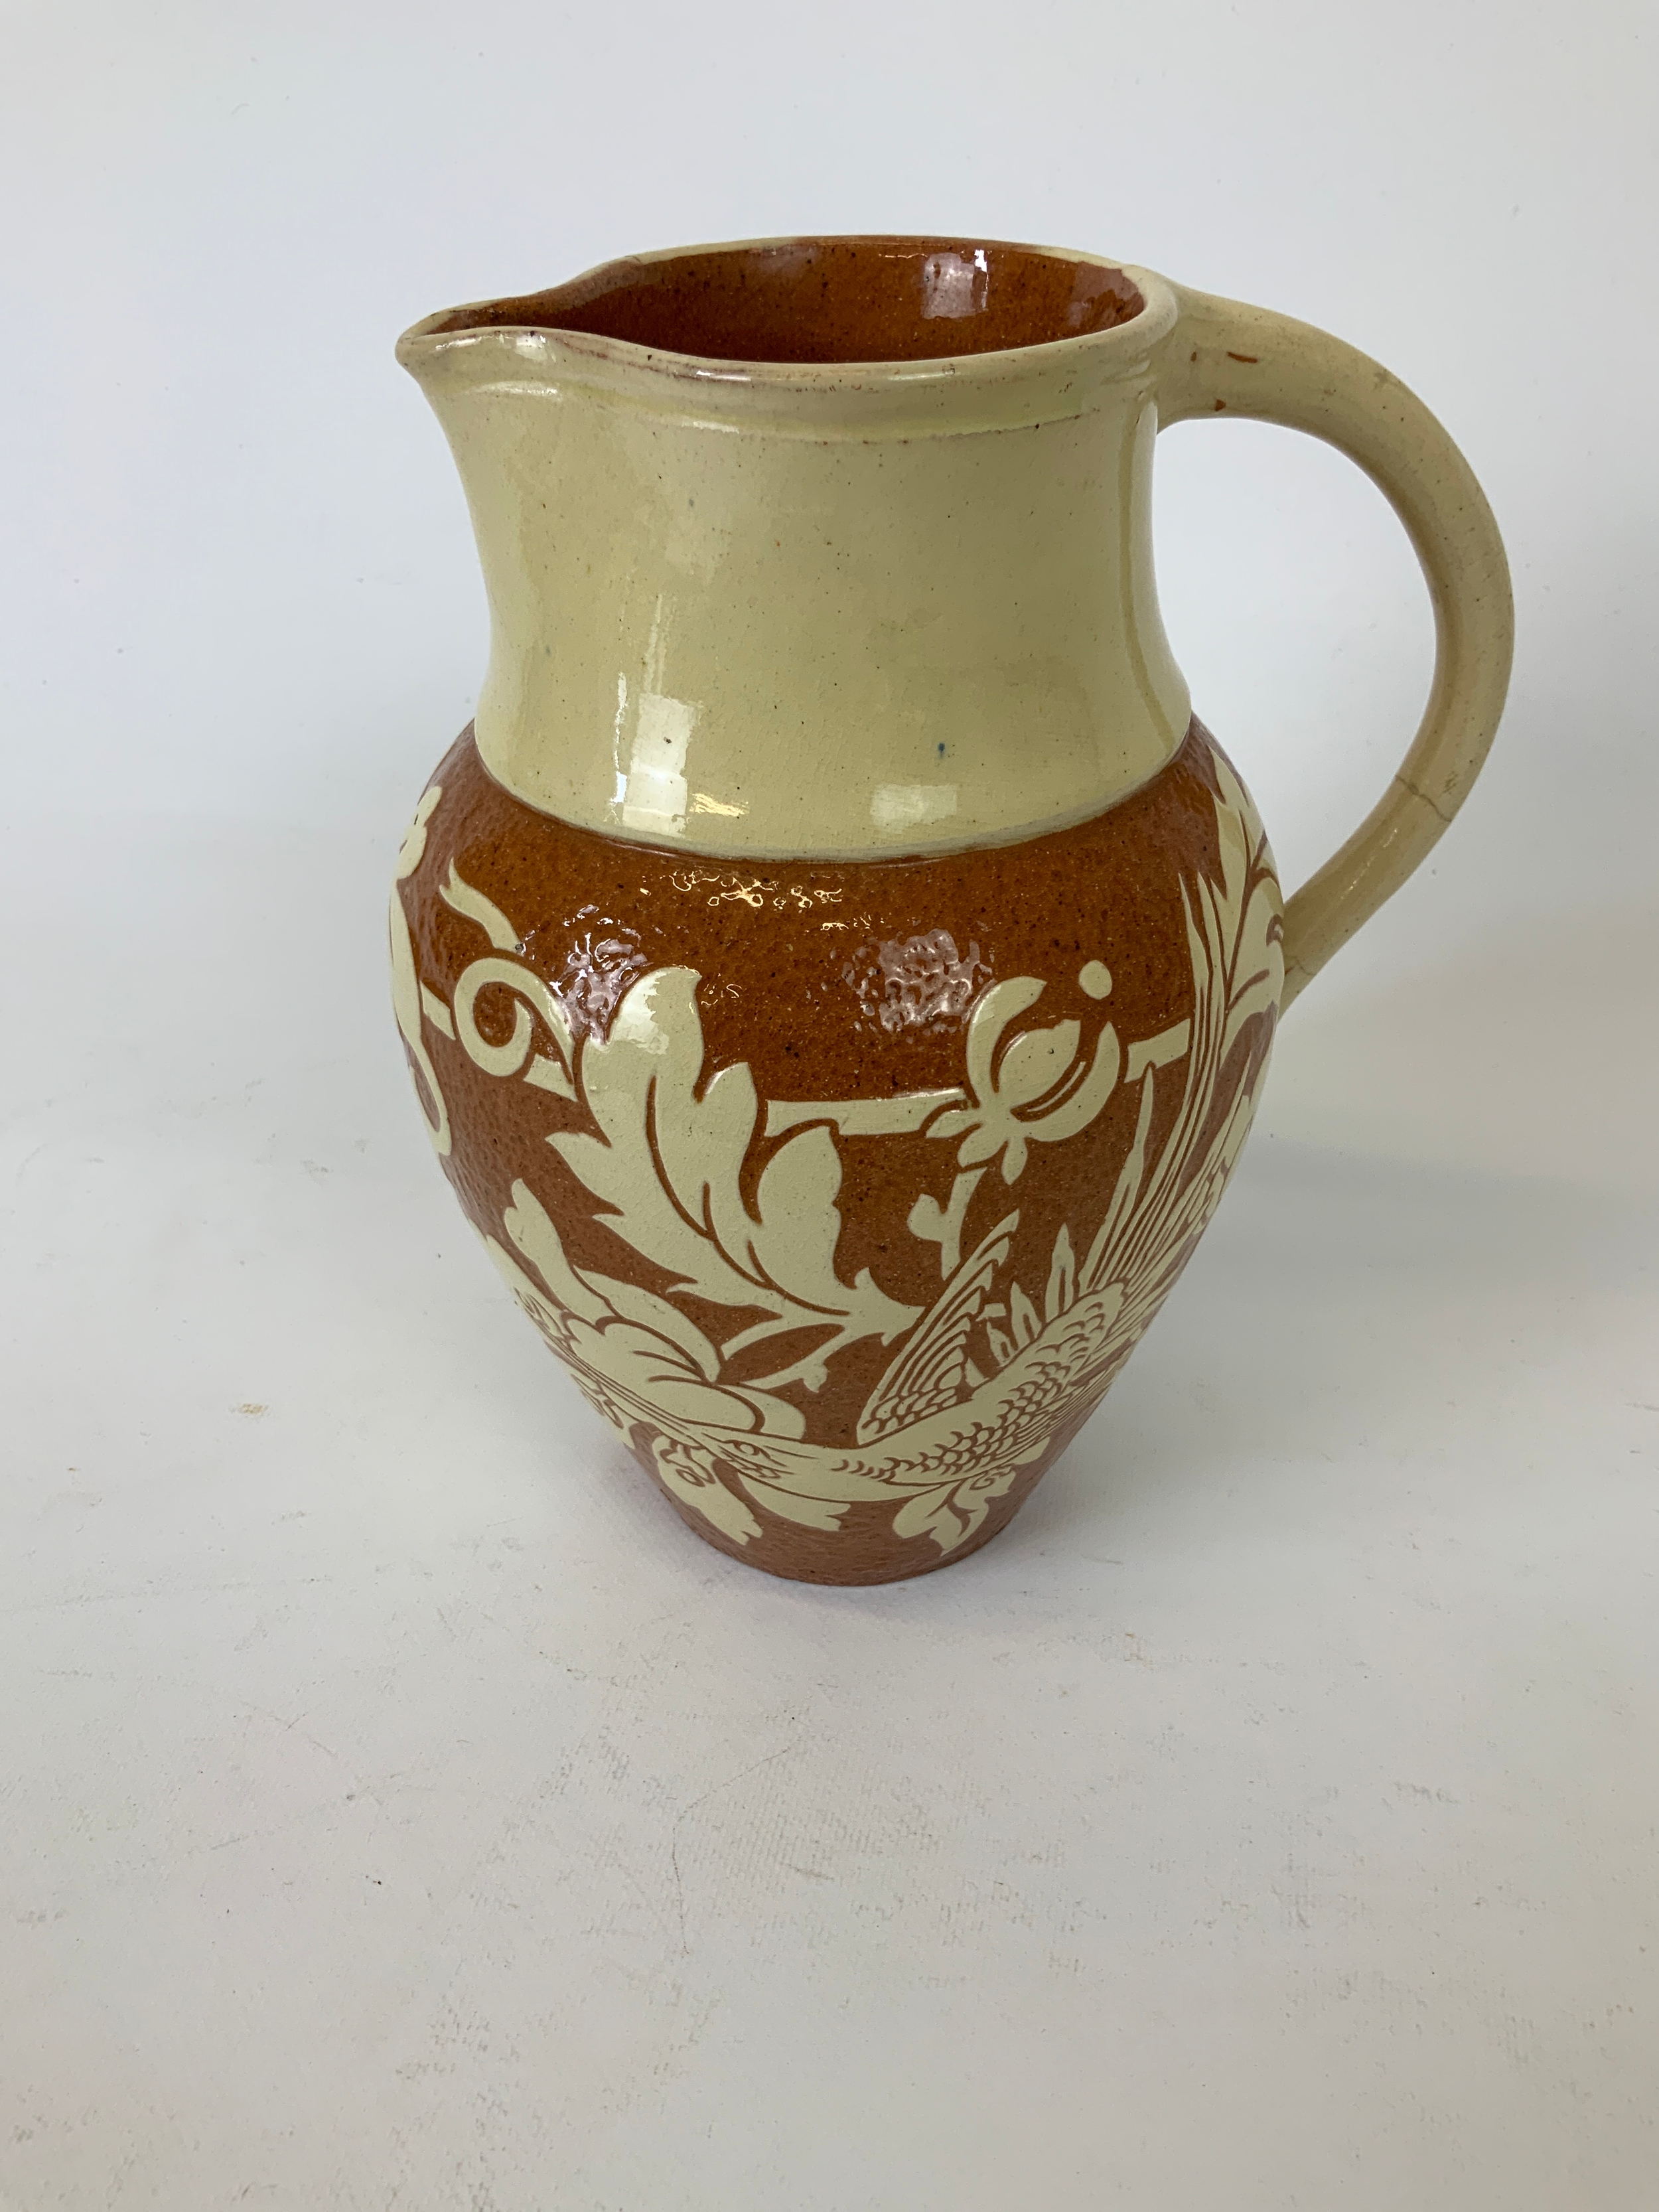 Lauder Jug - Signed - 21cm High - From the Collection of the Late Barry Hancock